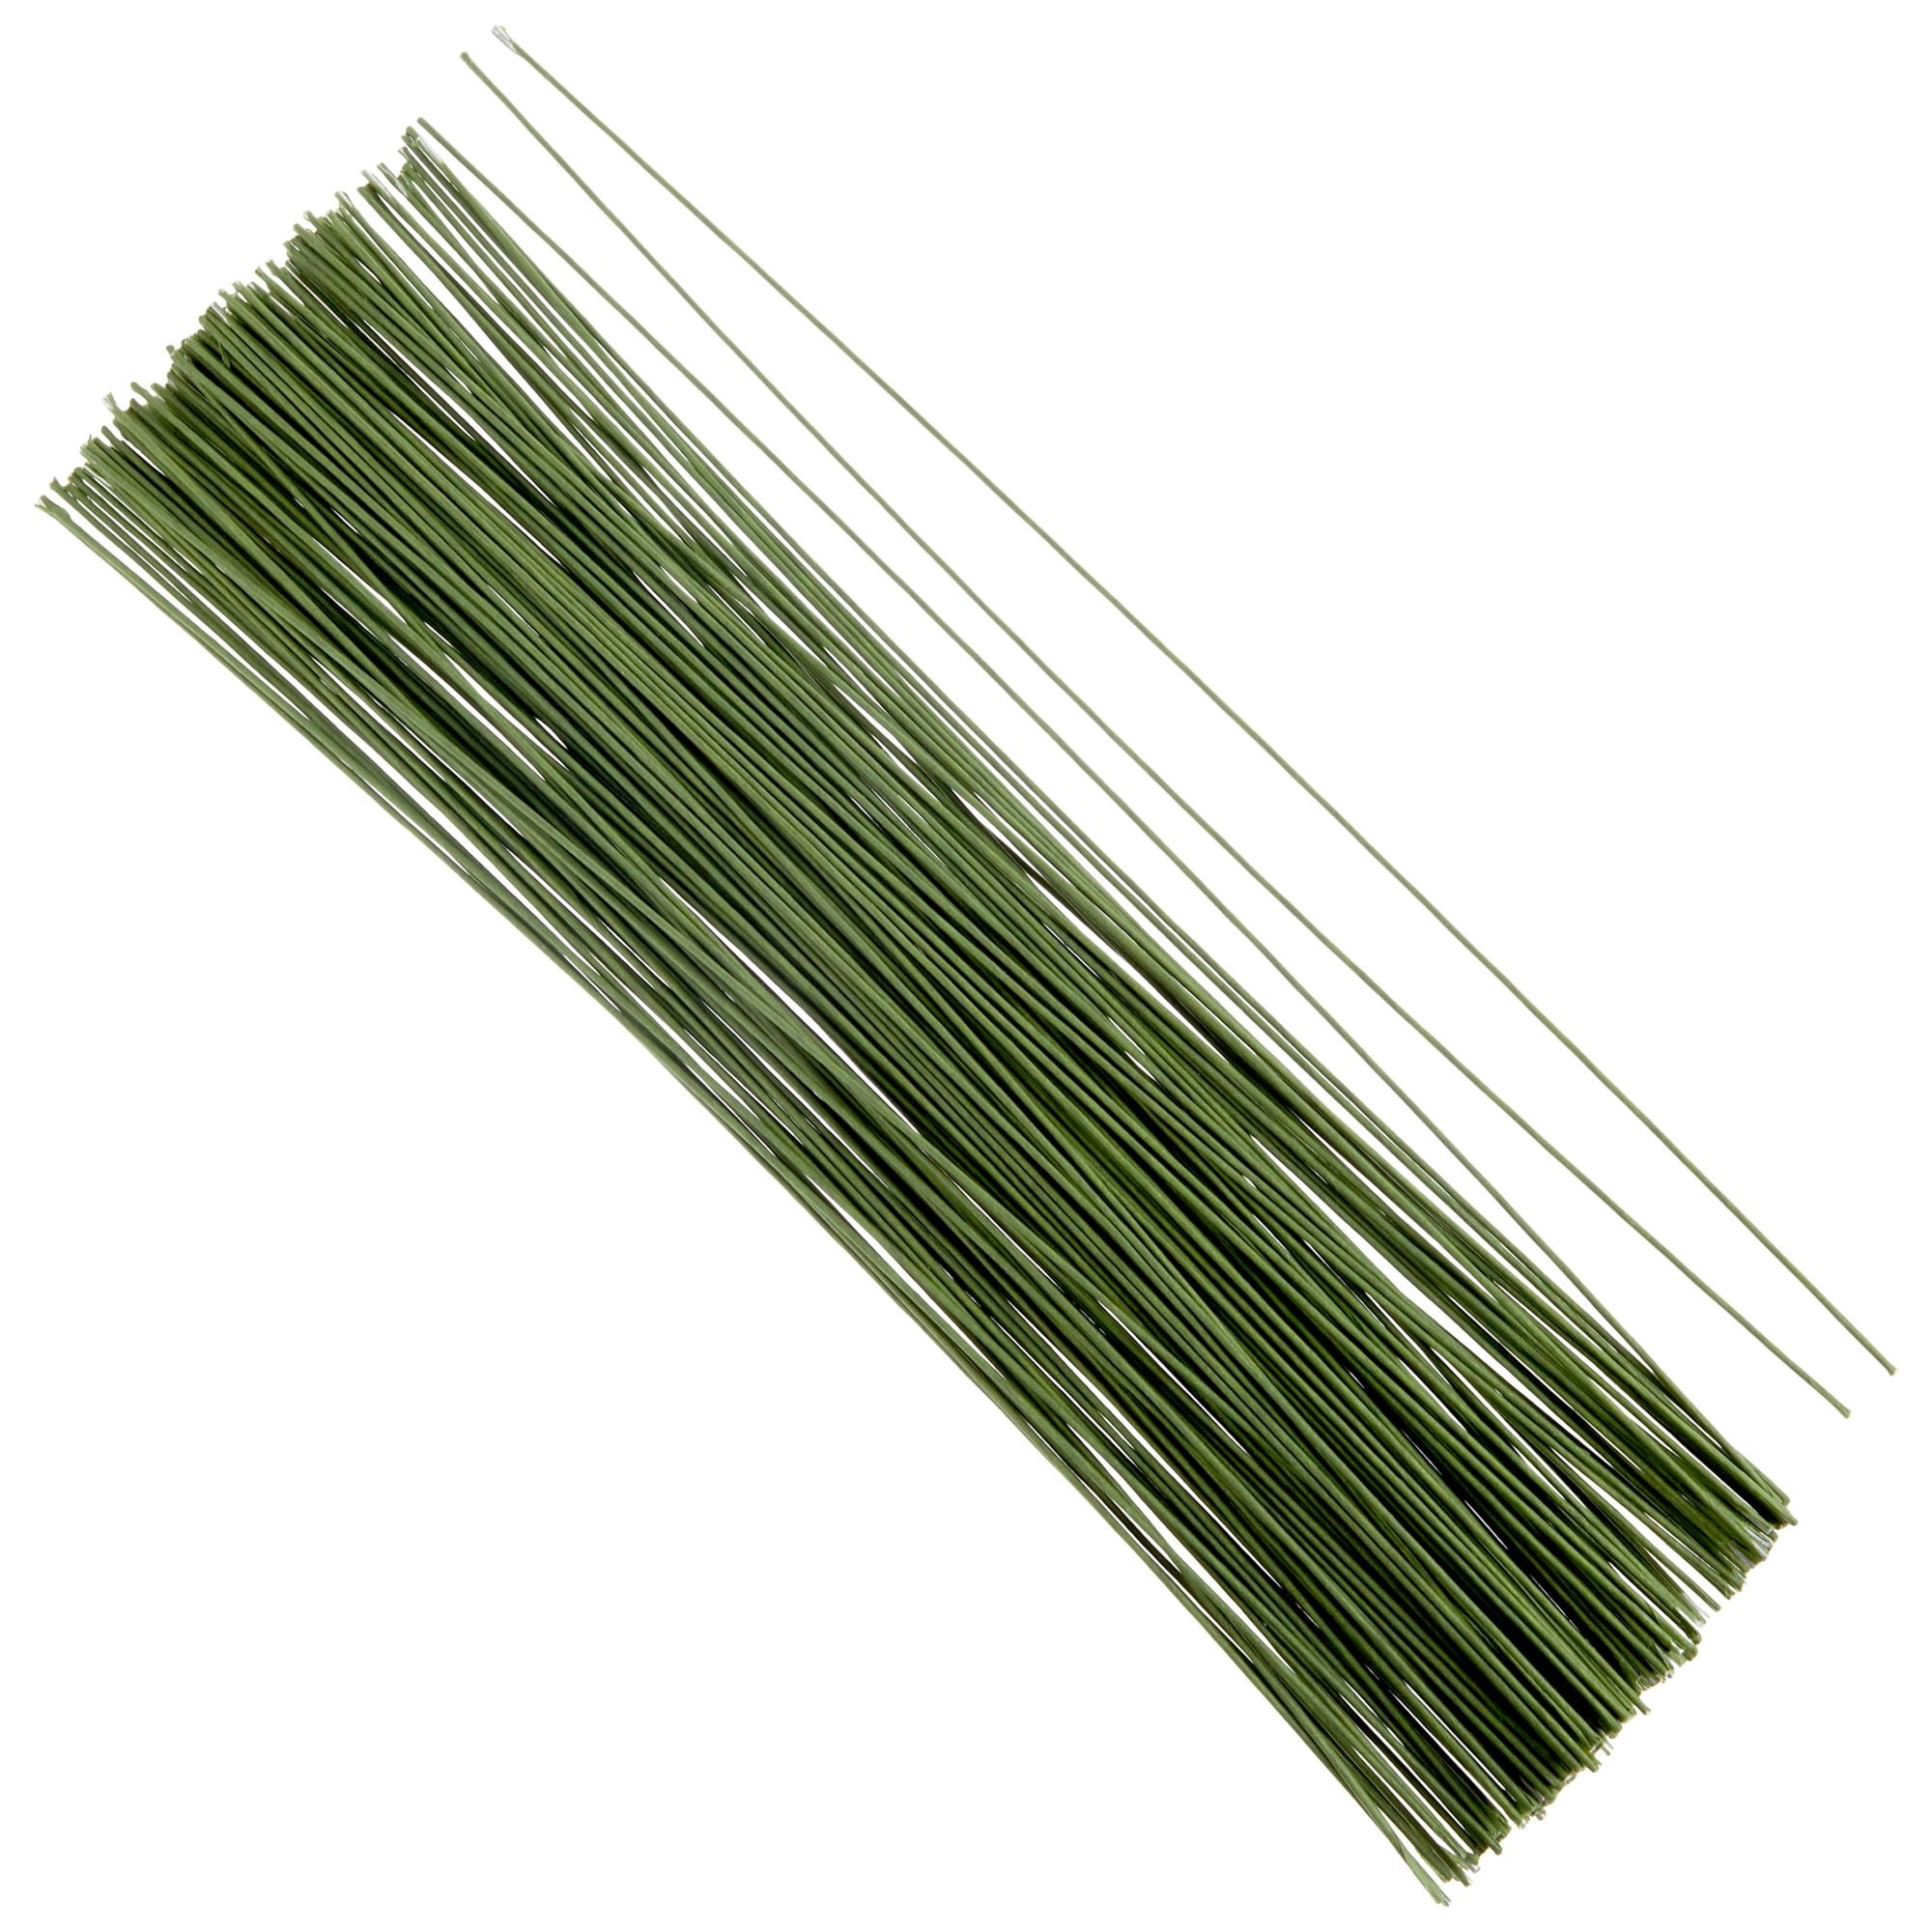 Hamiggaa 200 Pcs Floral Flower Stem Wire,16 inch 22 Gauge Flower Paper Wrapped Wire,Green Crafting Floral Stem for Flower Arrangements DIY,Bouquent